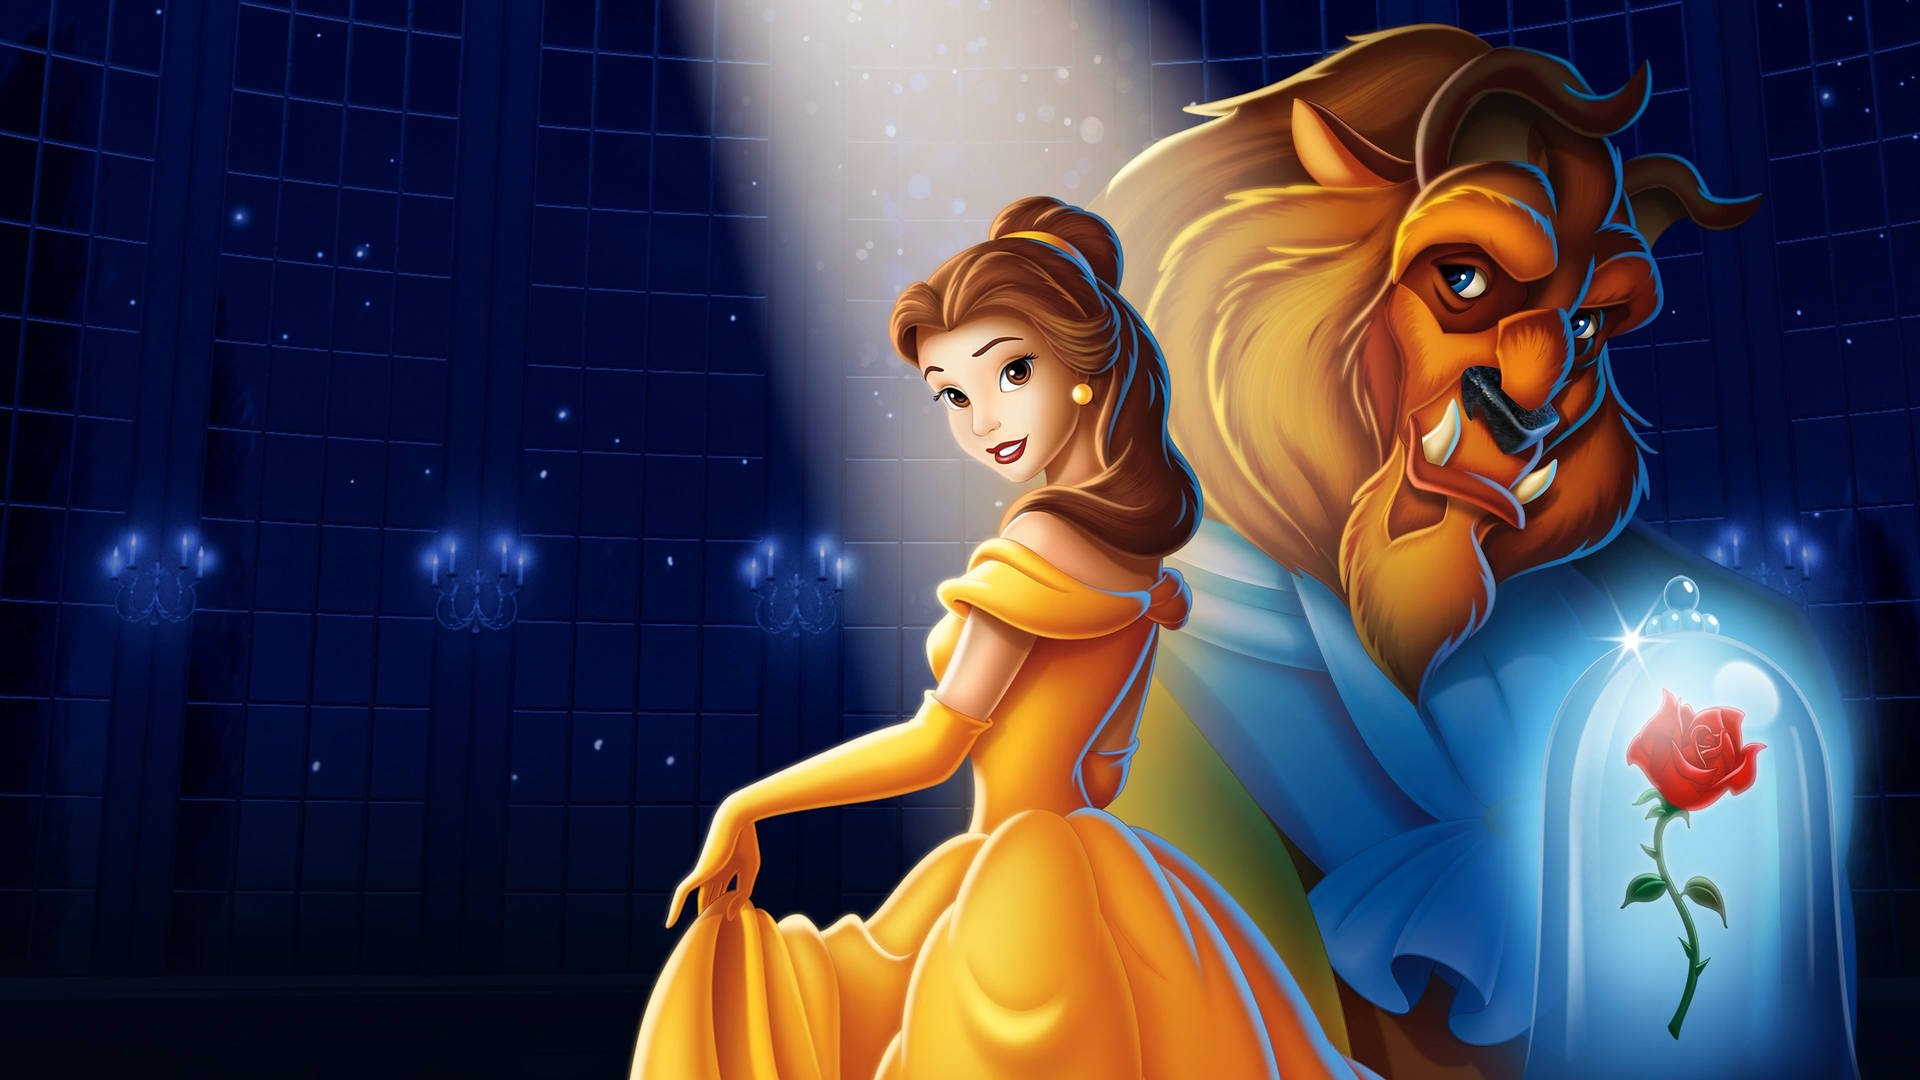 Disney's Belle And The Beast